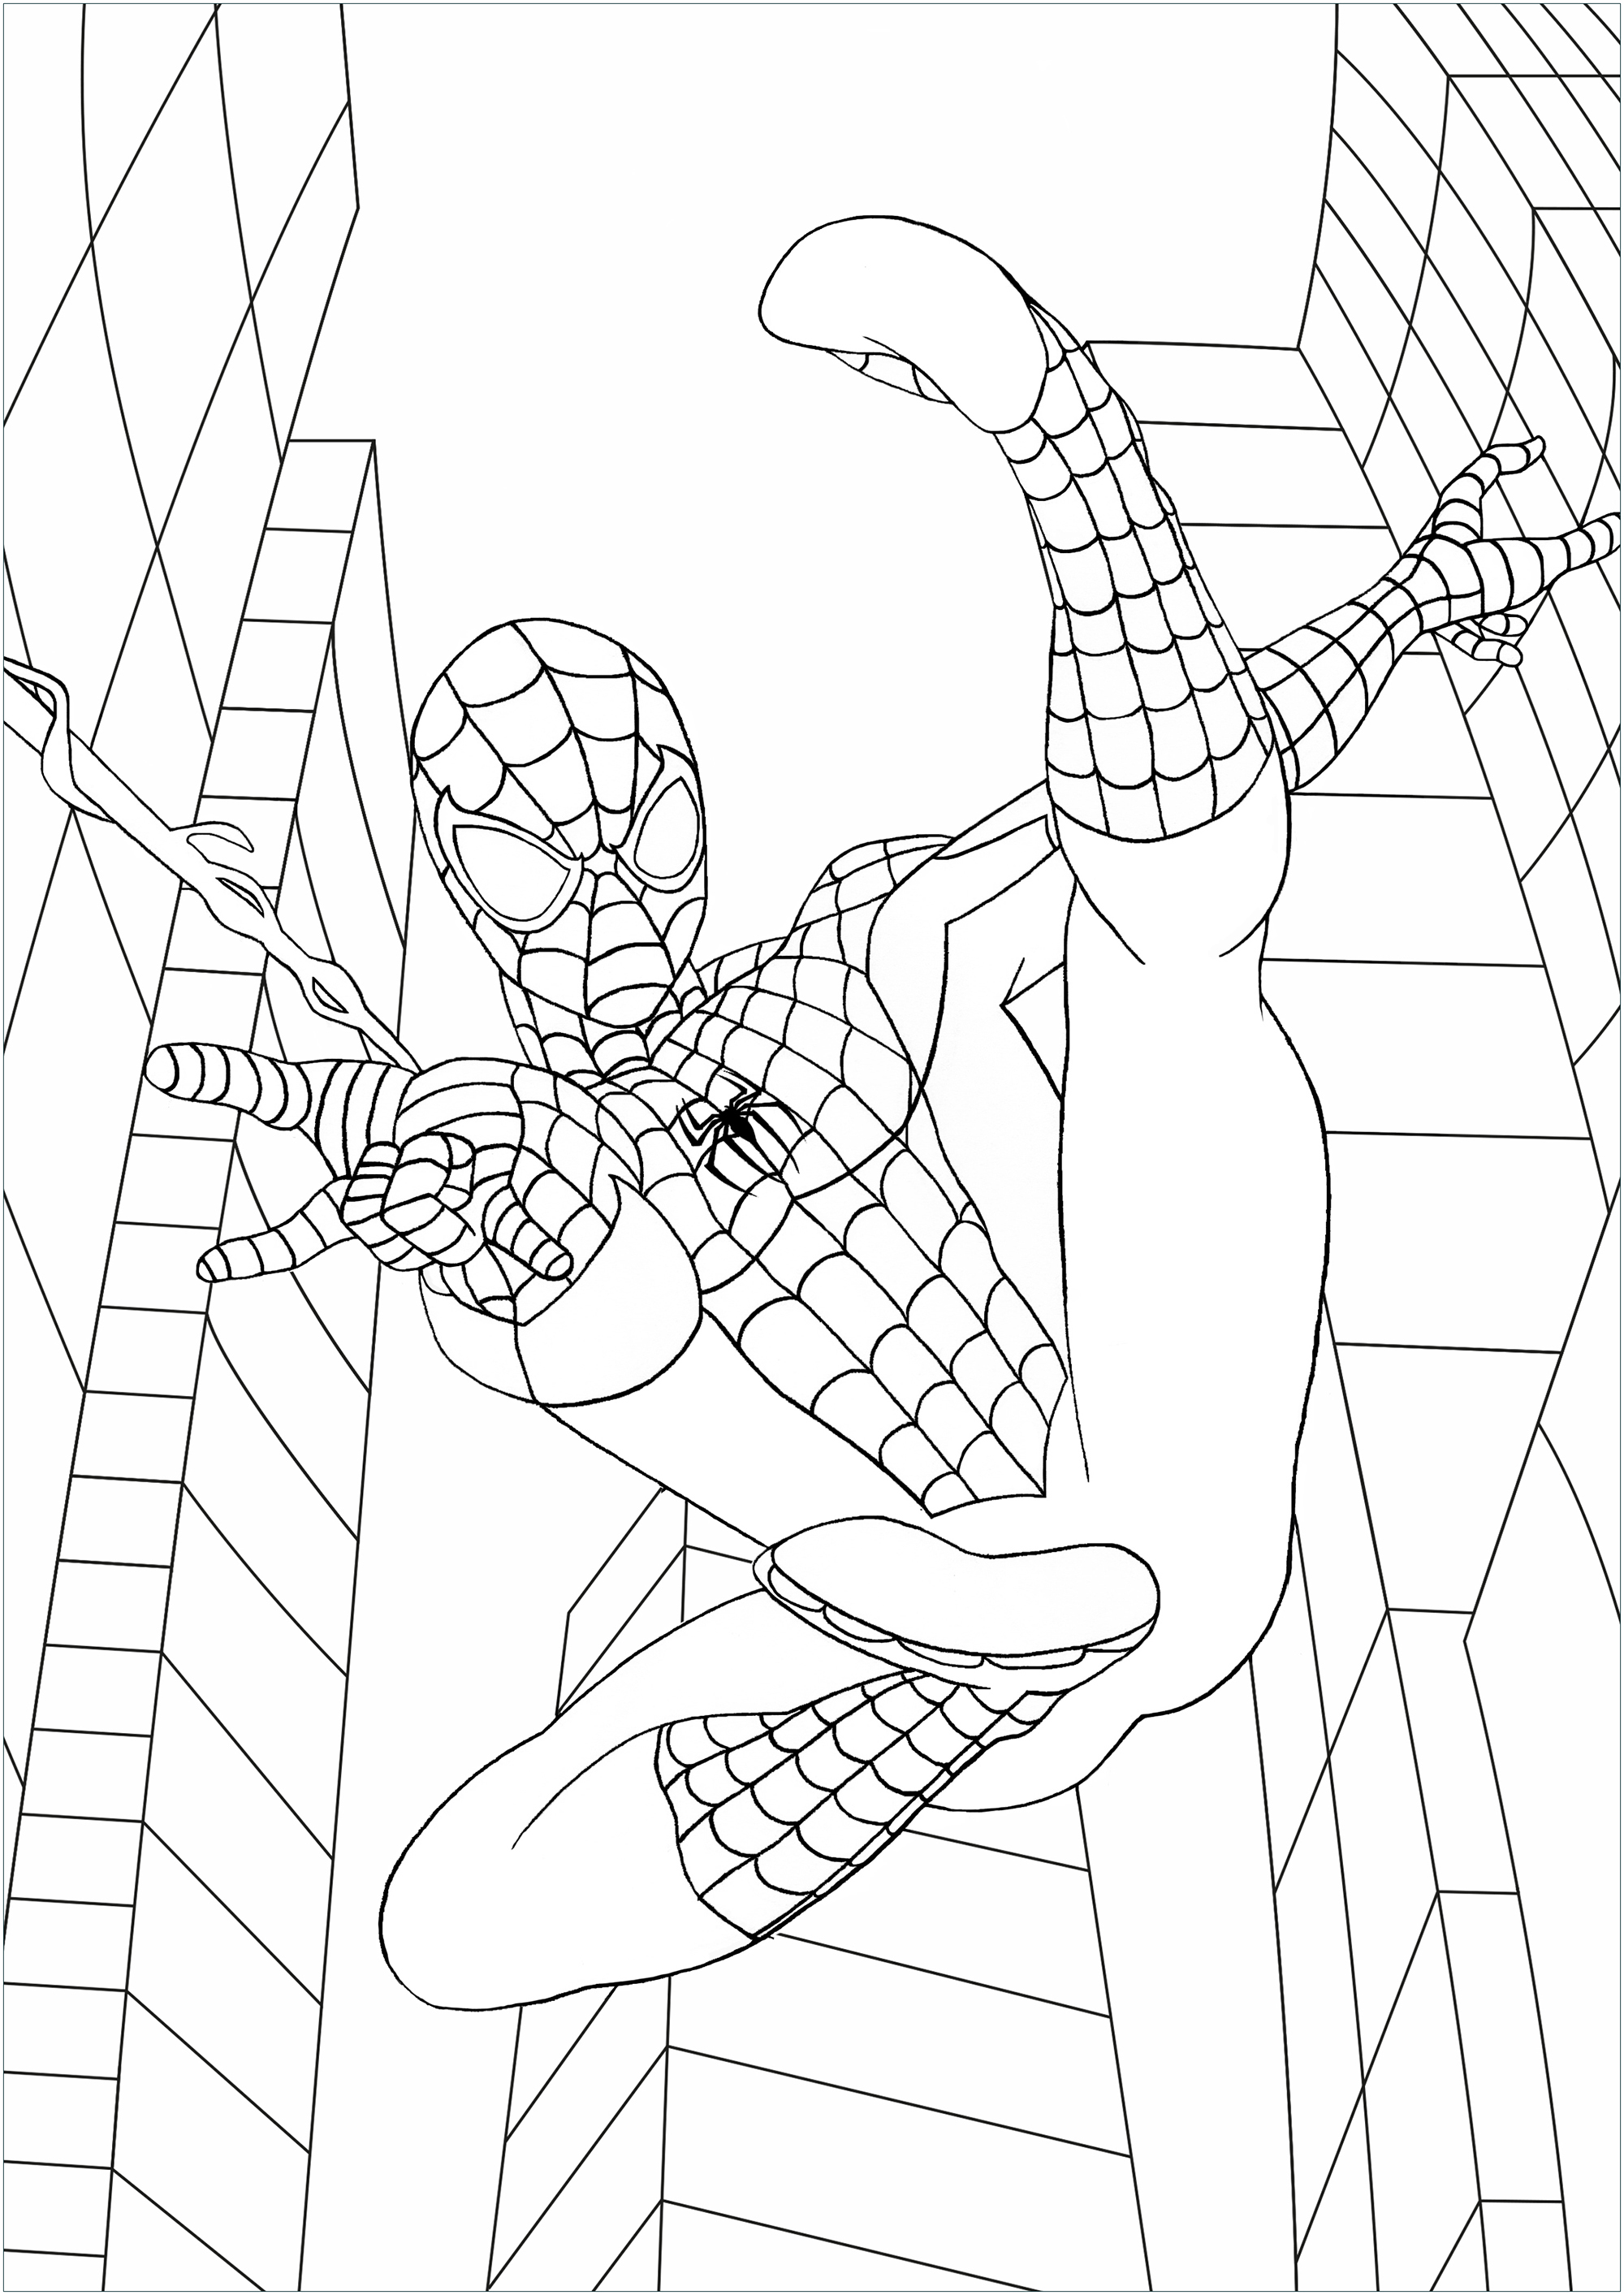 Download Spiderman free to color for kids - Spiderman Kids Coloring ...